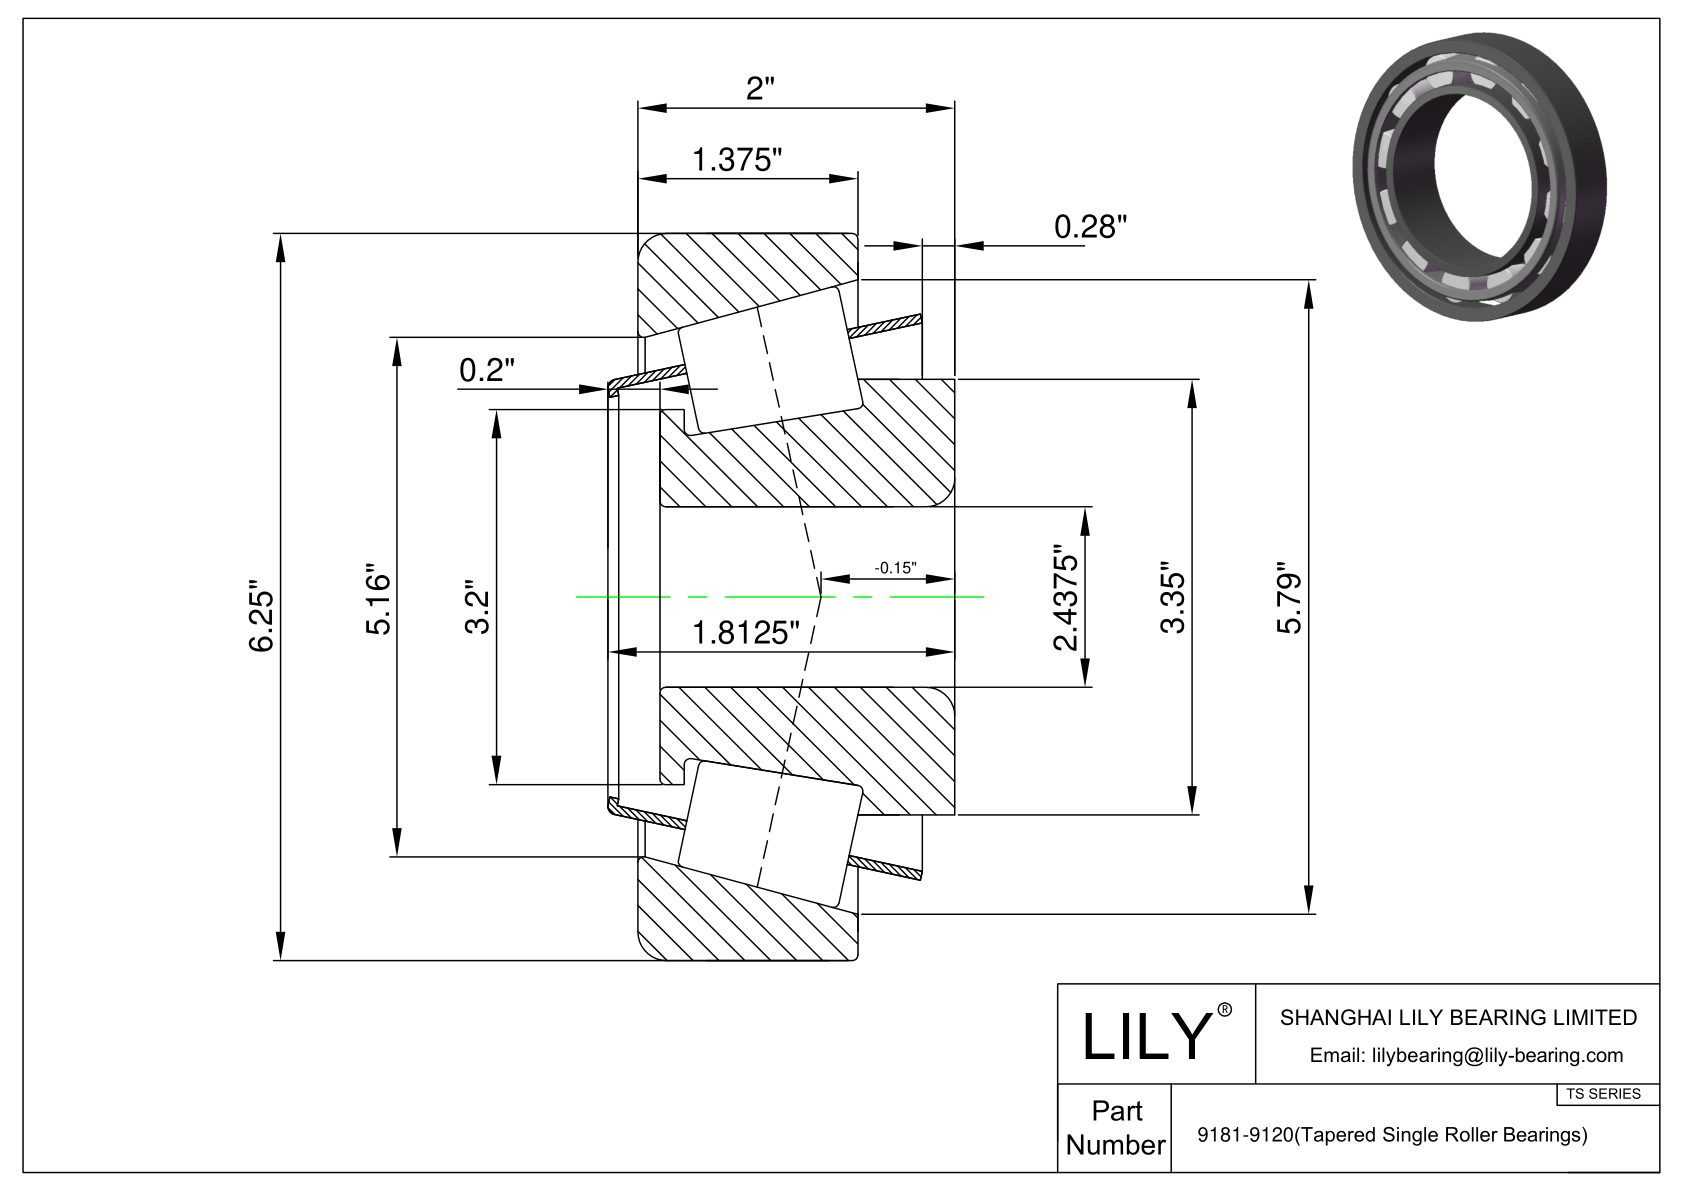 9181-9120 TS (Tapered Single Roller Bearings) (Imperial) cad drawing